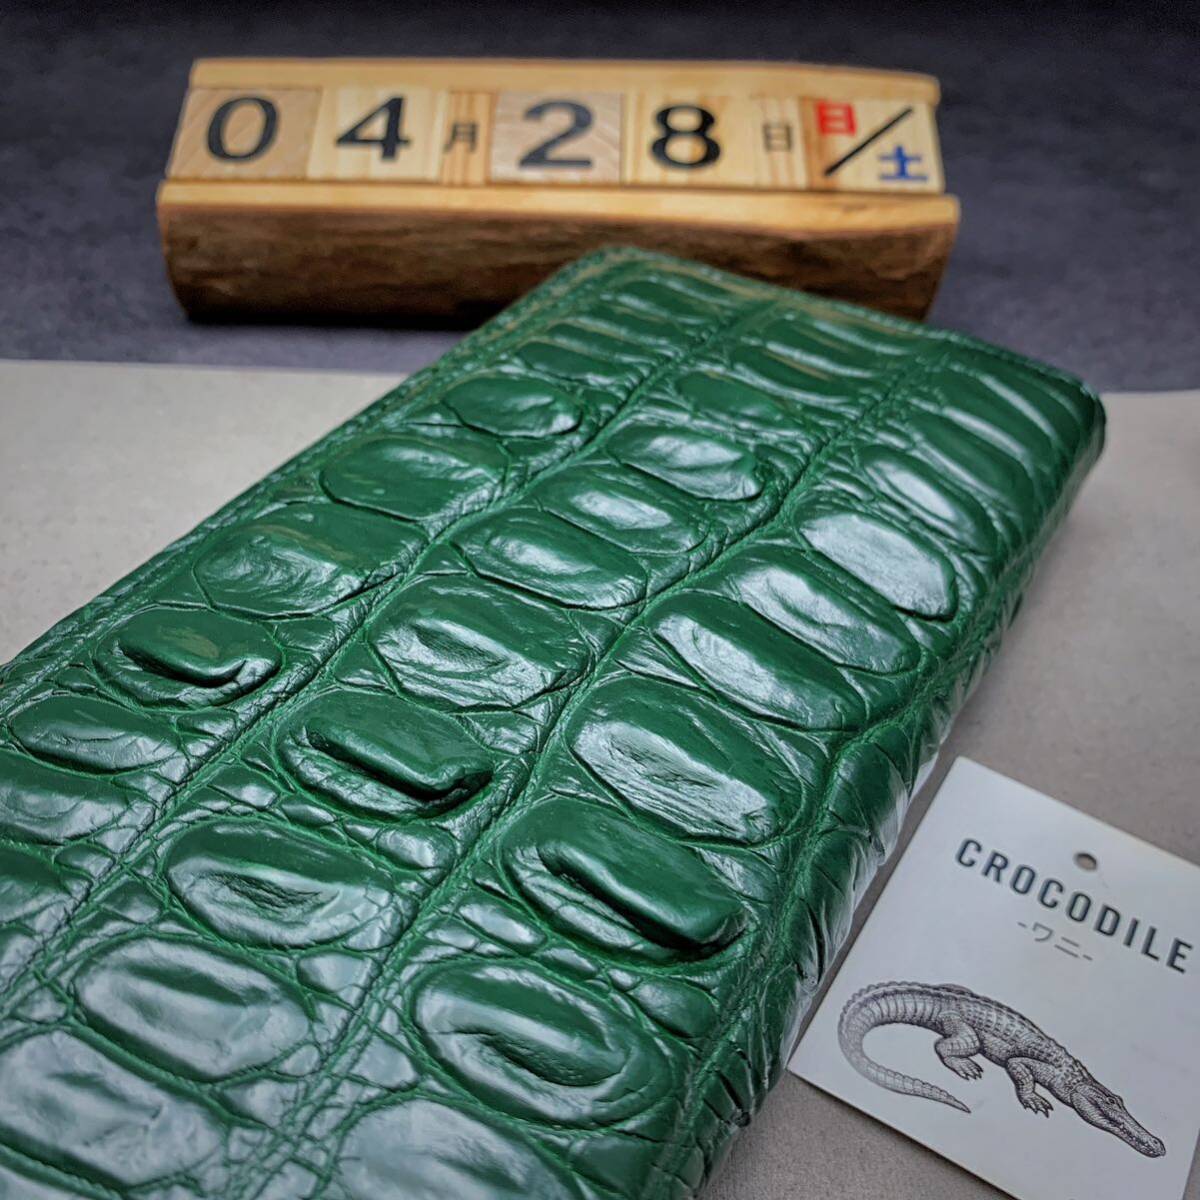  luck with money color [ crocodile ]. leather wani leather long wallet round fastener genuine article guarantee . leather use change purse . equipped .. men's purse one sheets leather the truth thing photograph 